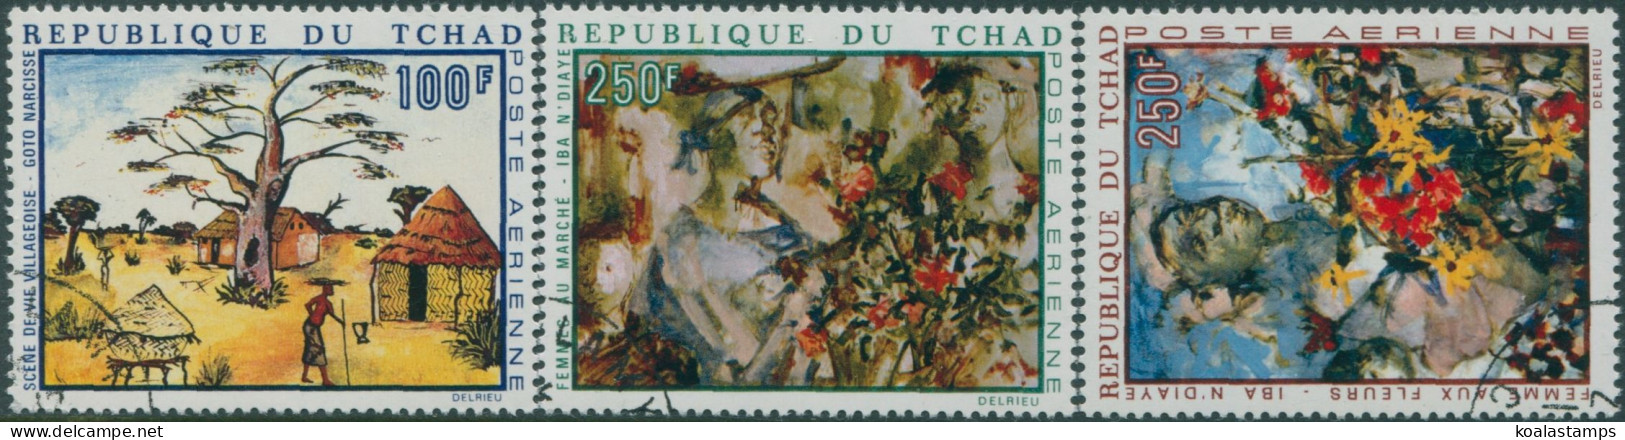 Chad 1970 SG296-298 African Paintings Set FU - Chad (1960-...)